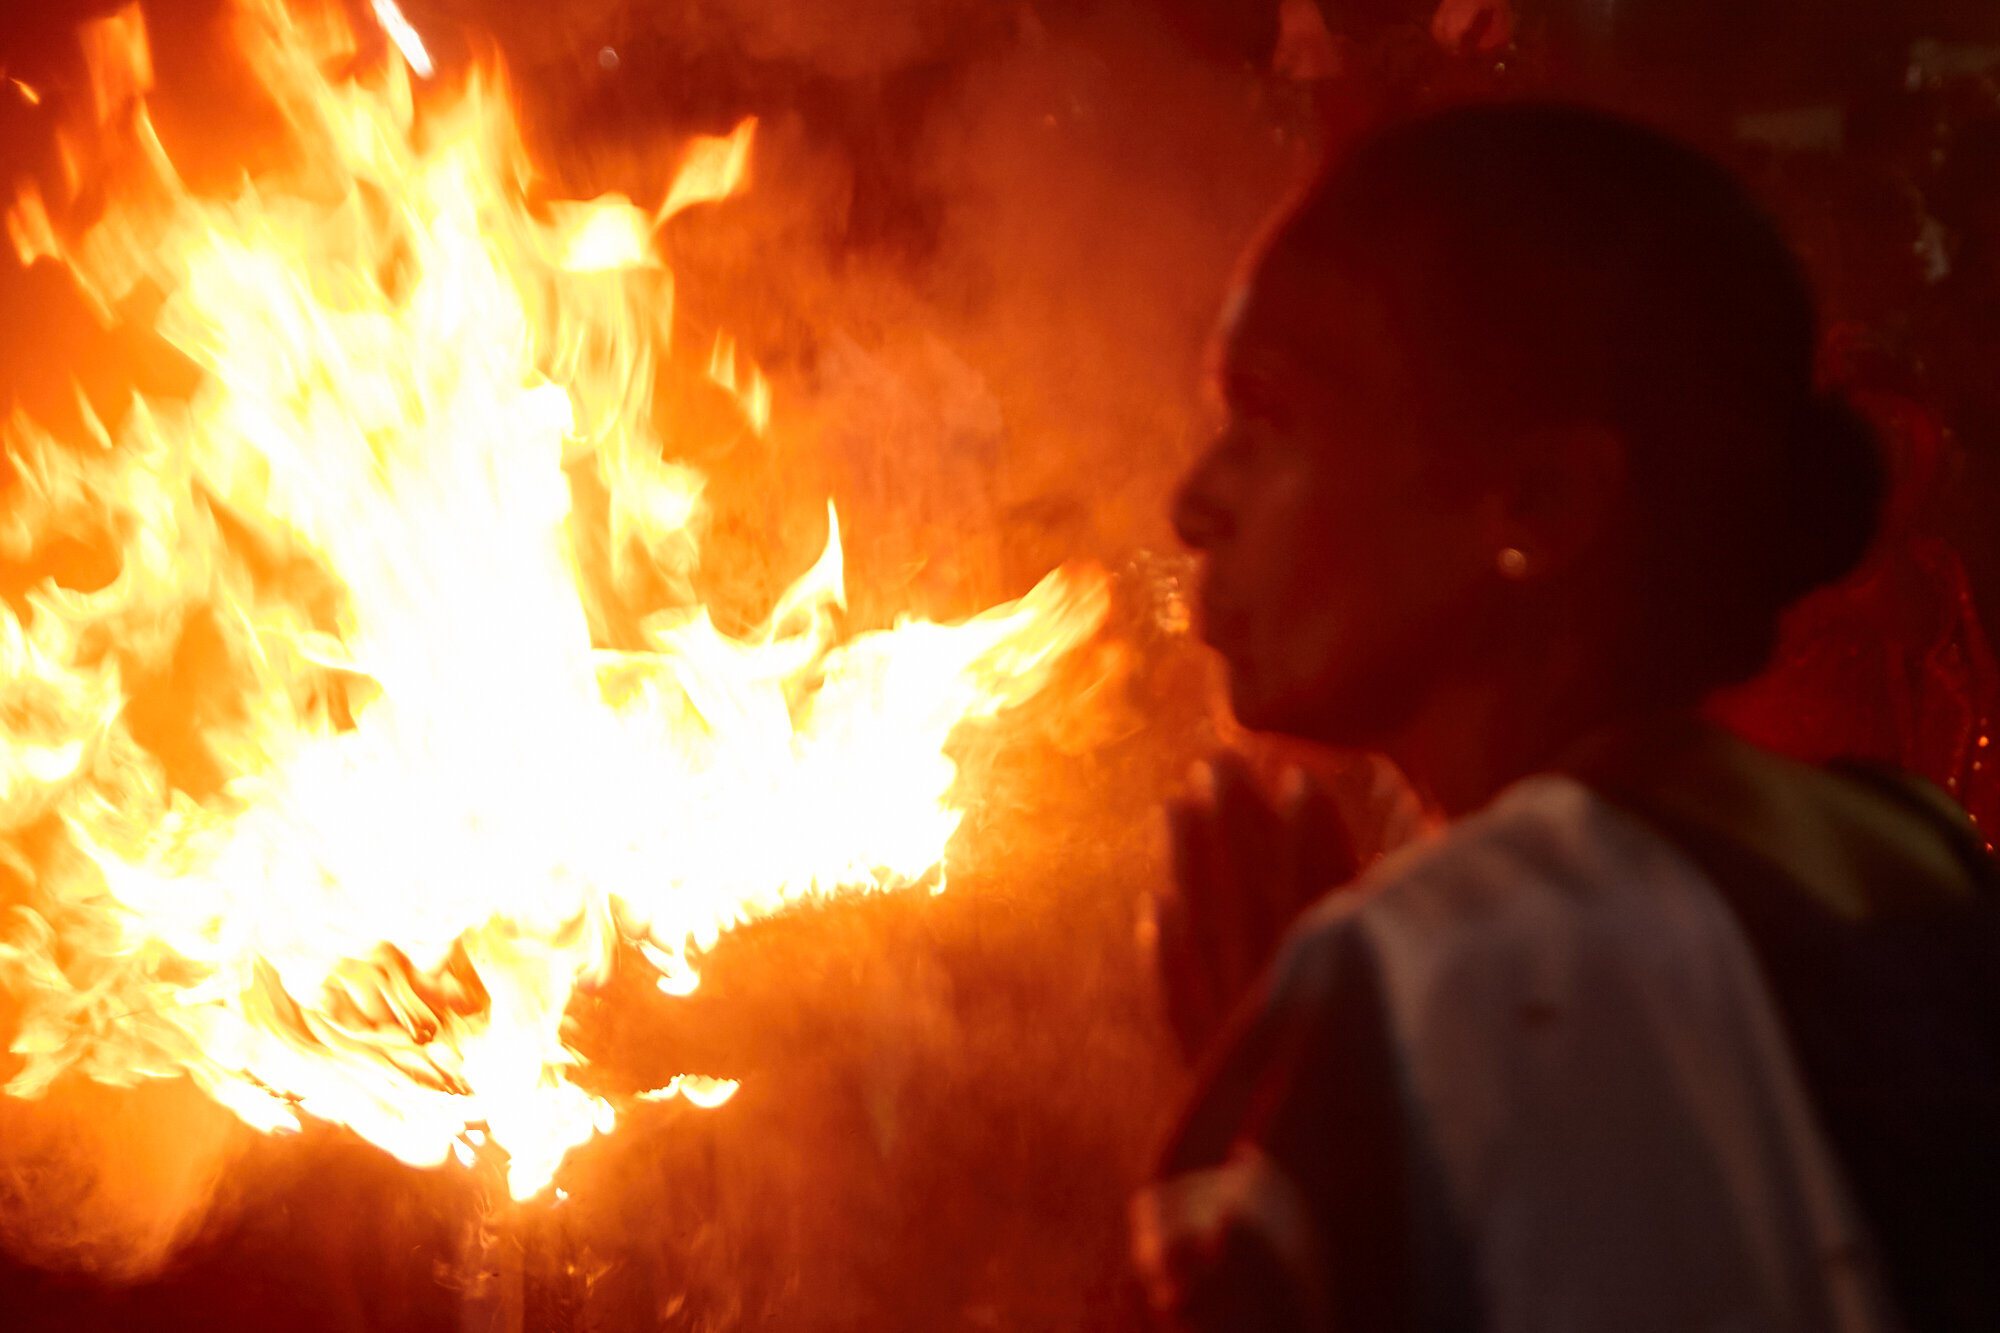  Fire plays an important role in Hindu worships. It resembles energy and people continued to put camphor so the fire will continue, thus the collective energy. 